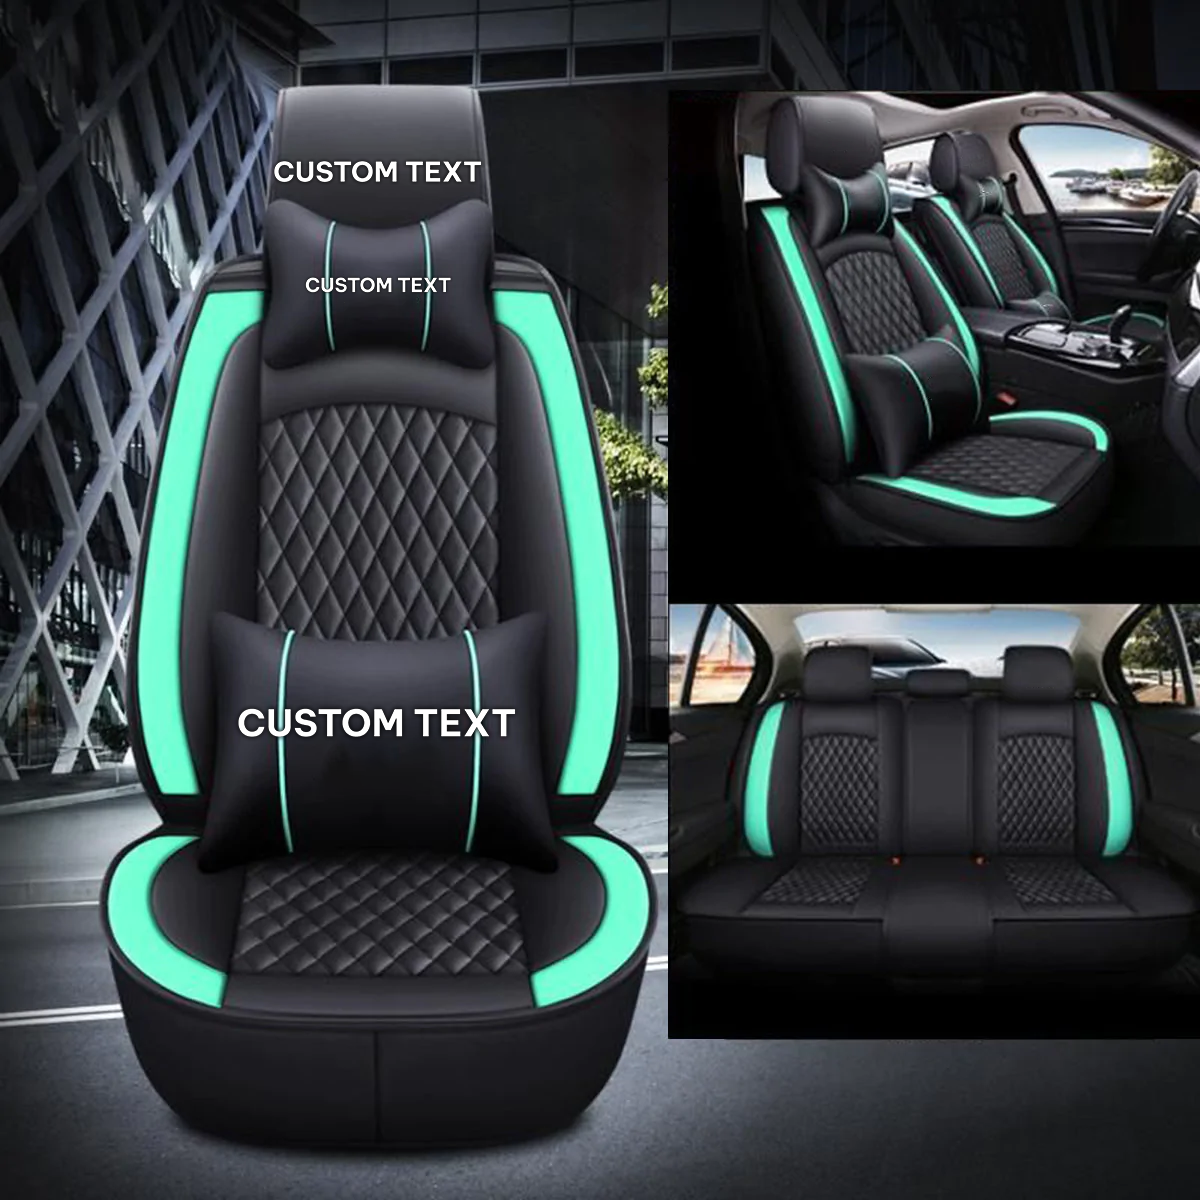 Custom Text For Seat Covers 5 Seats Full Set, Custom Fit For Your Cars, Leatherette Automotive Seat Cushion Protector Universal Fit, Vehicle Auto Interior Decor FM13988